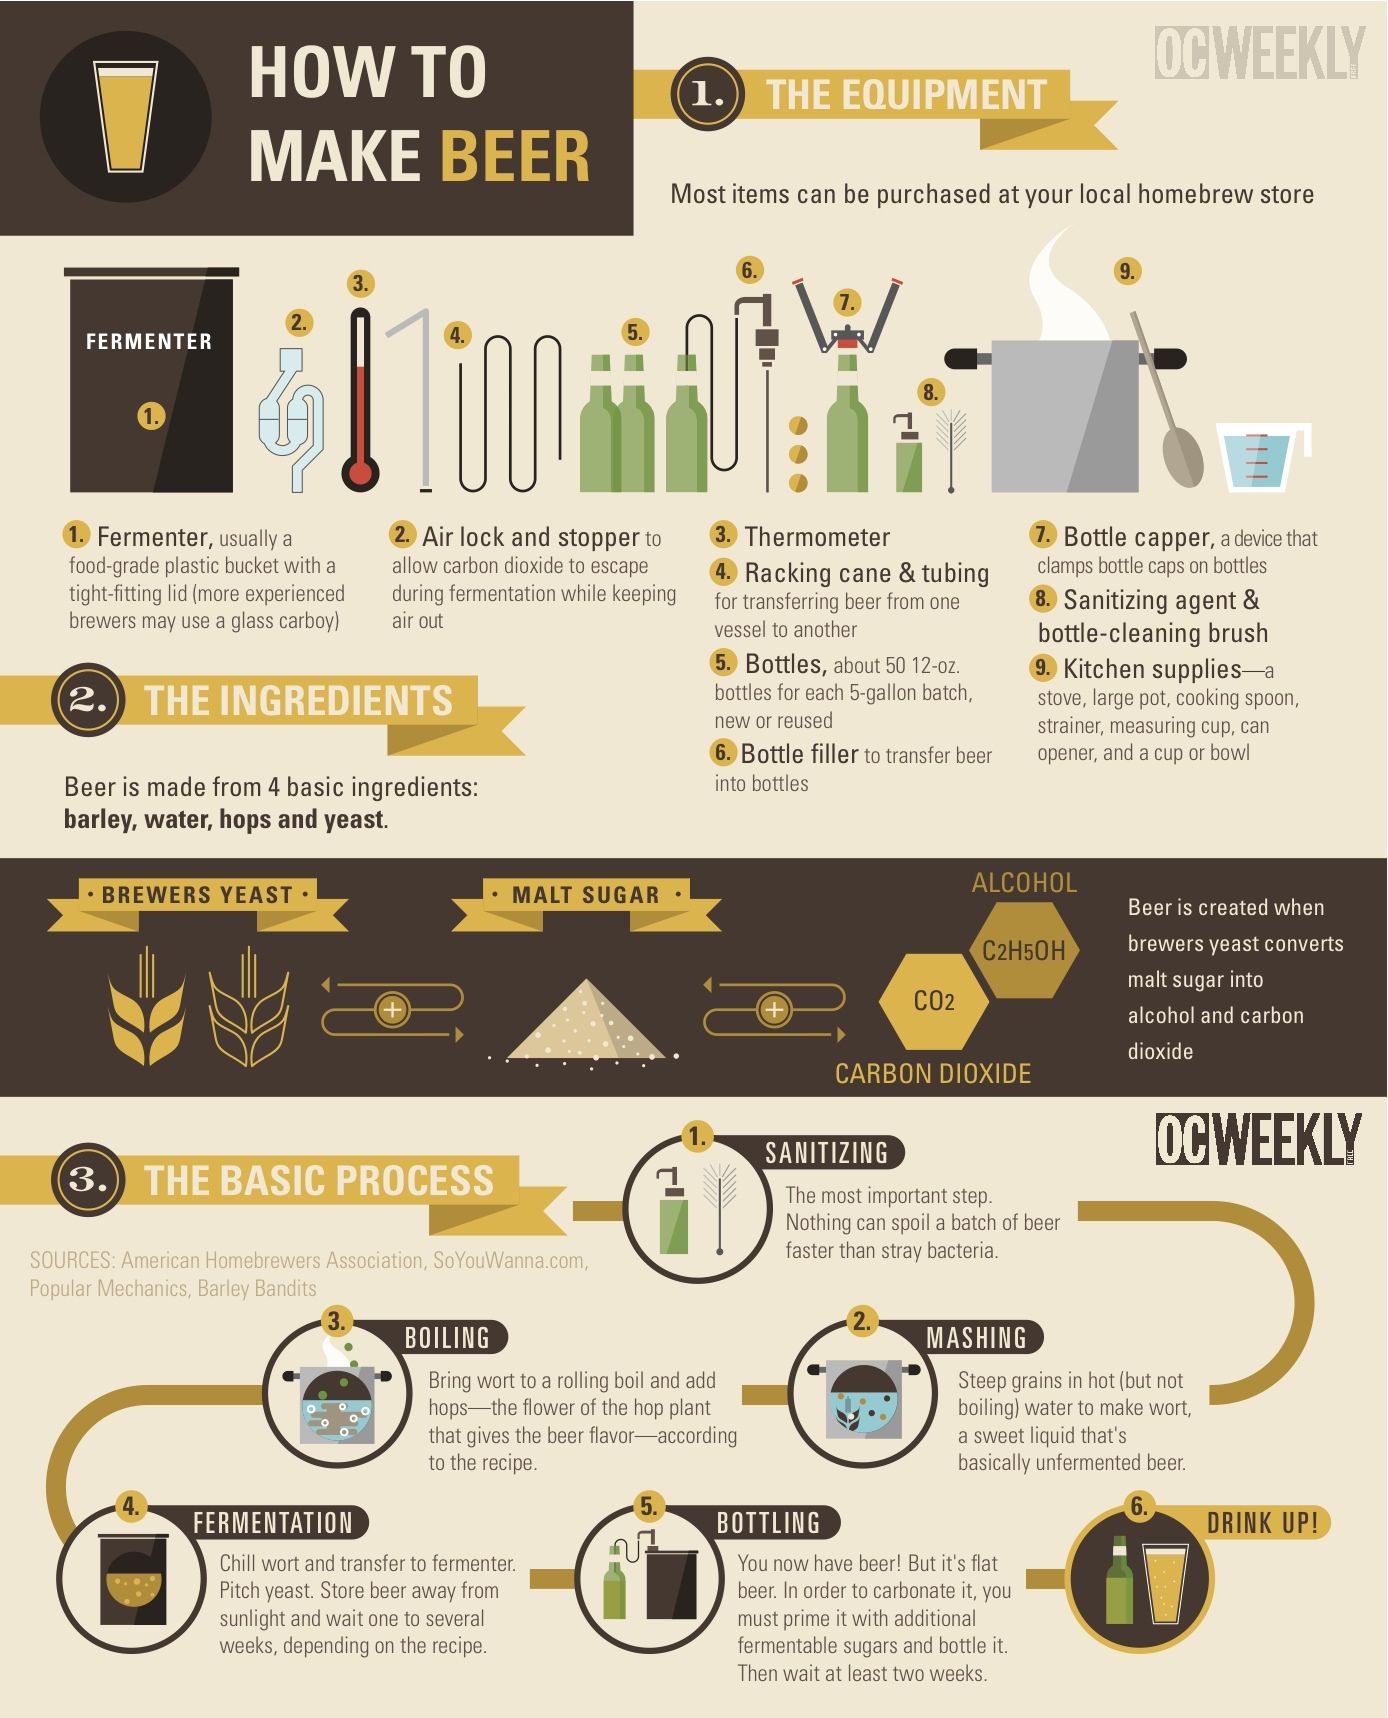 How to Brew Your Own Booze | Daily Infographic